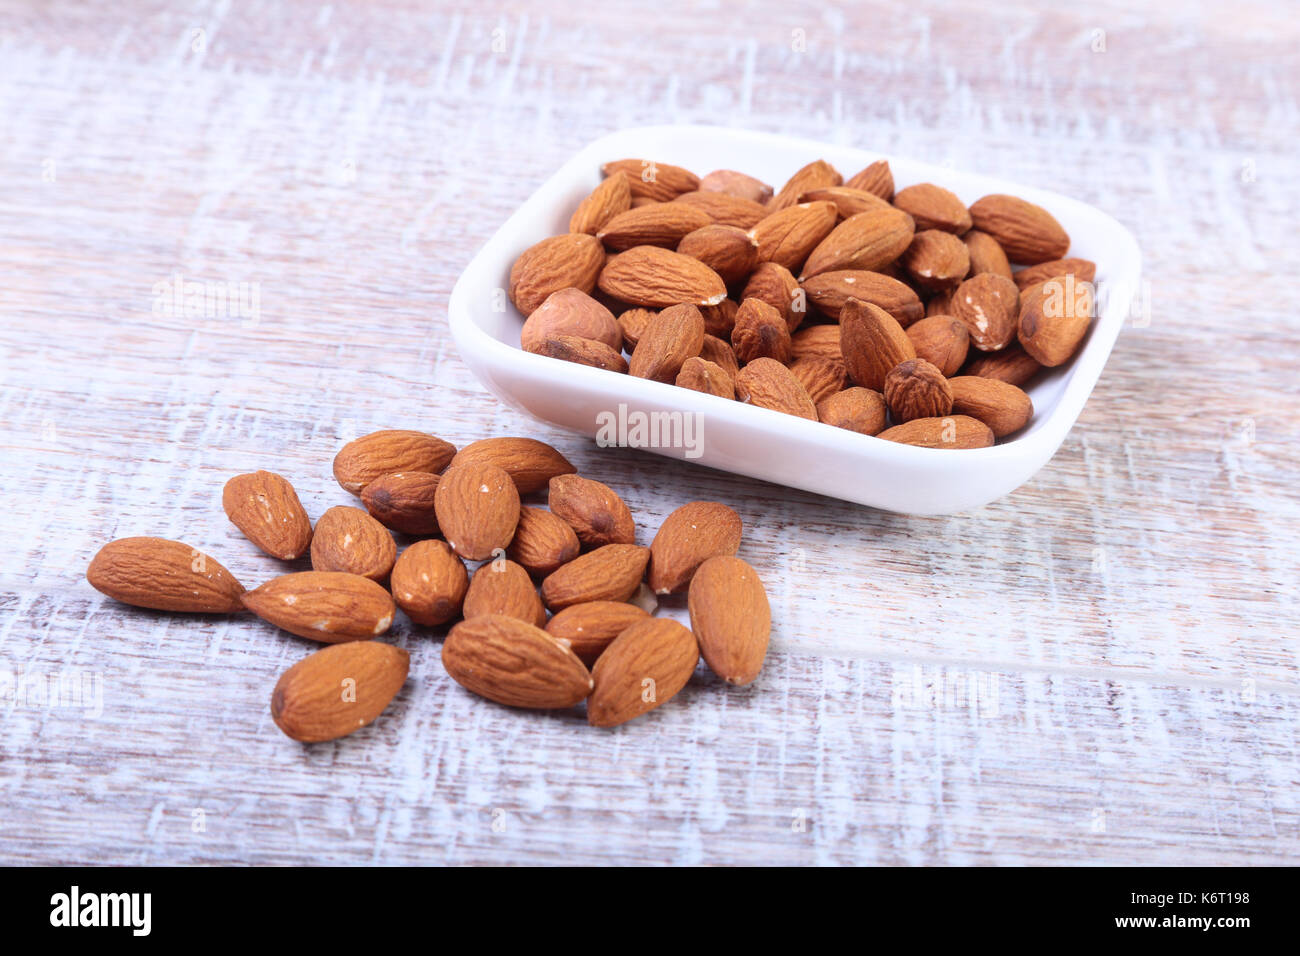 nuts almonds in white bowl on wooden background. Selective focus. Stock Photo